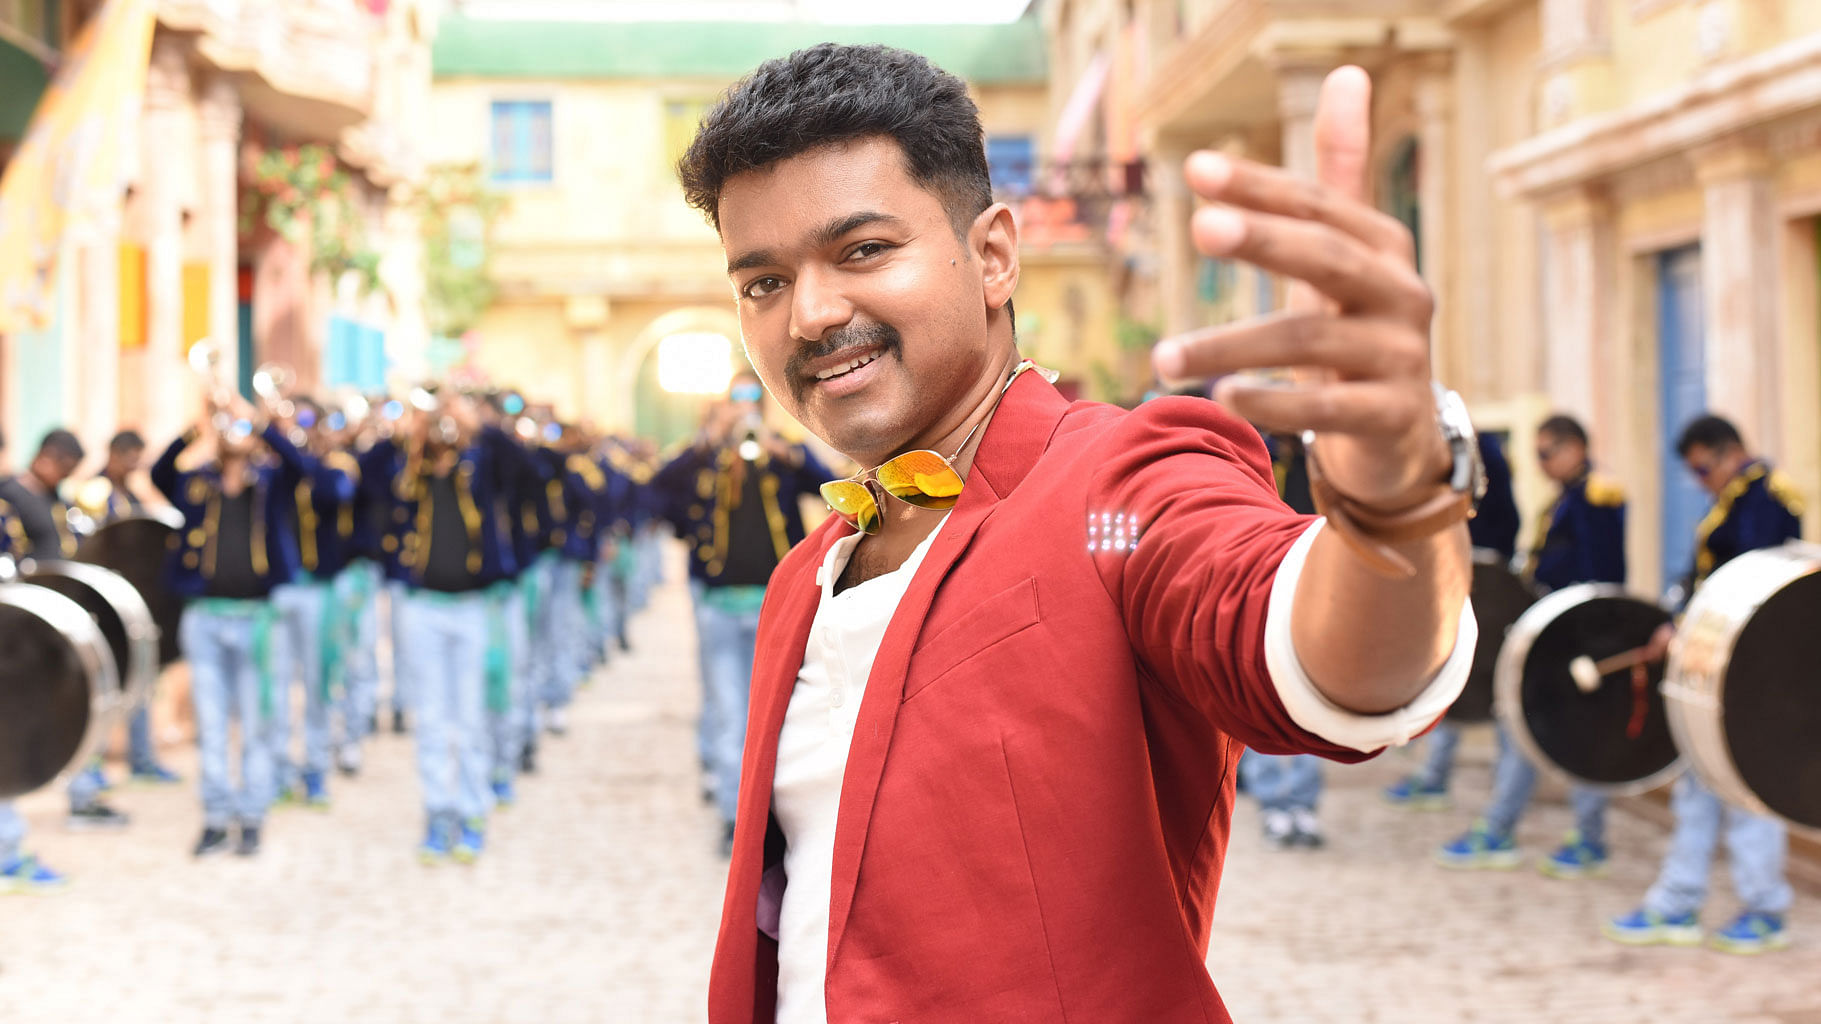 Theri, Kaththi: films starring Thalapathy Vijay that deserve Bollywood  treatment - Bollywood News & Gossip, Movie Reviews, Trailers & Videos at  Bollywoodlife.com